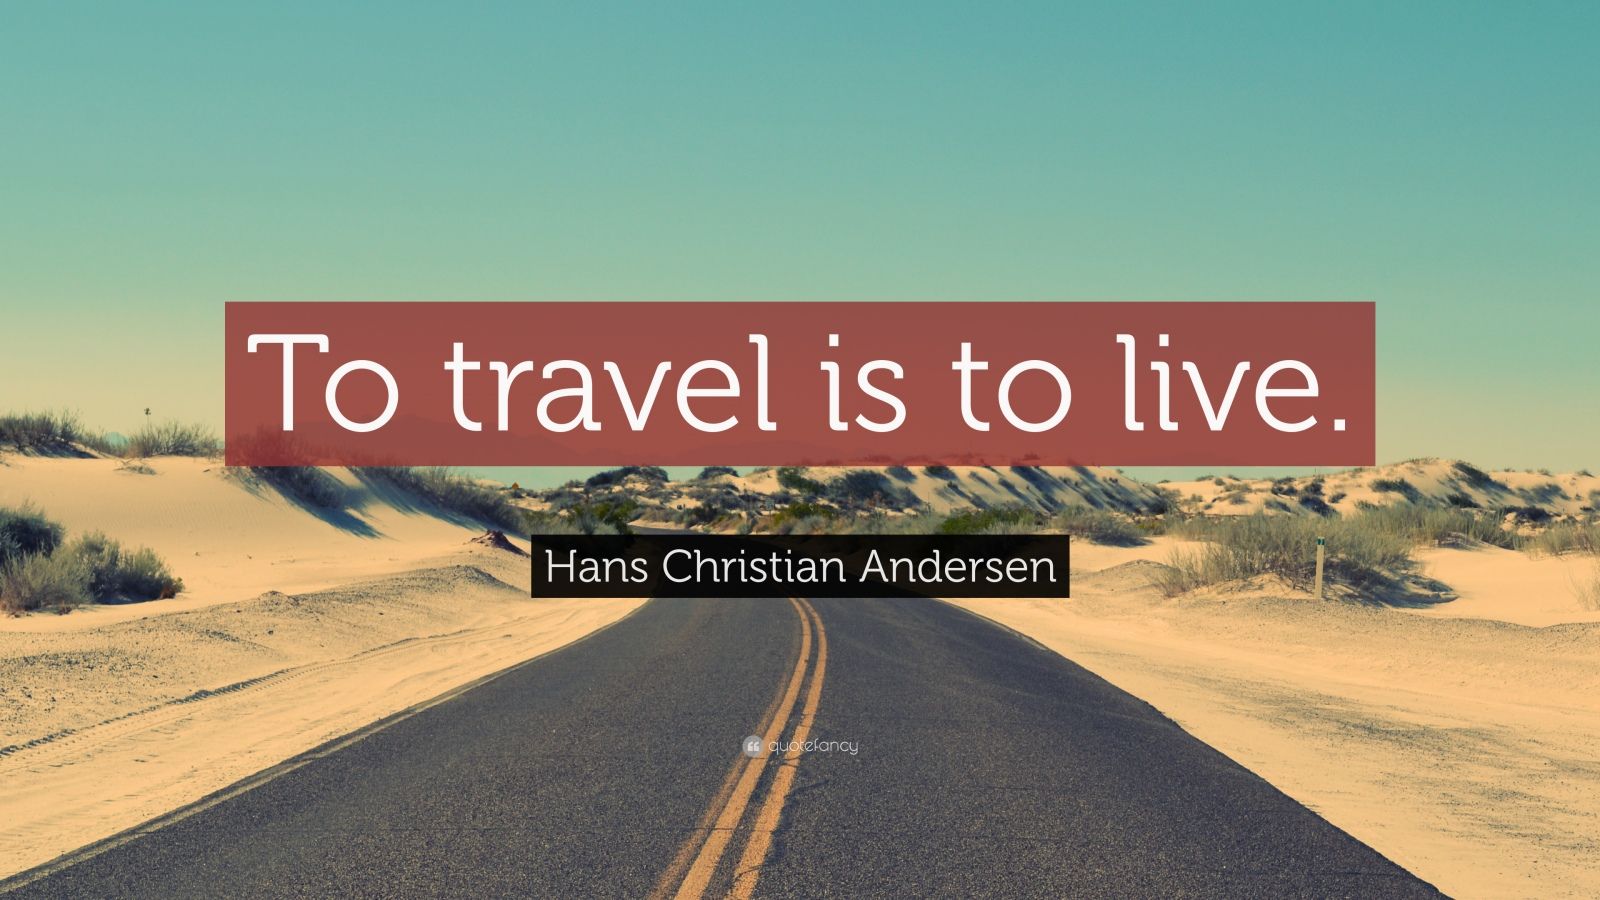 hans christian andersen quote at sfo terminal